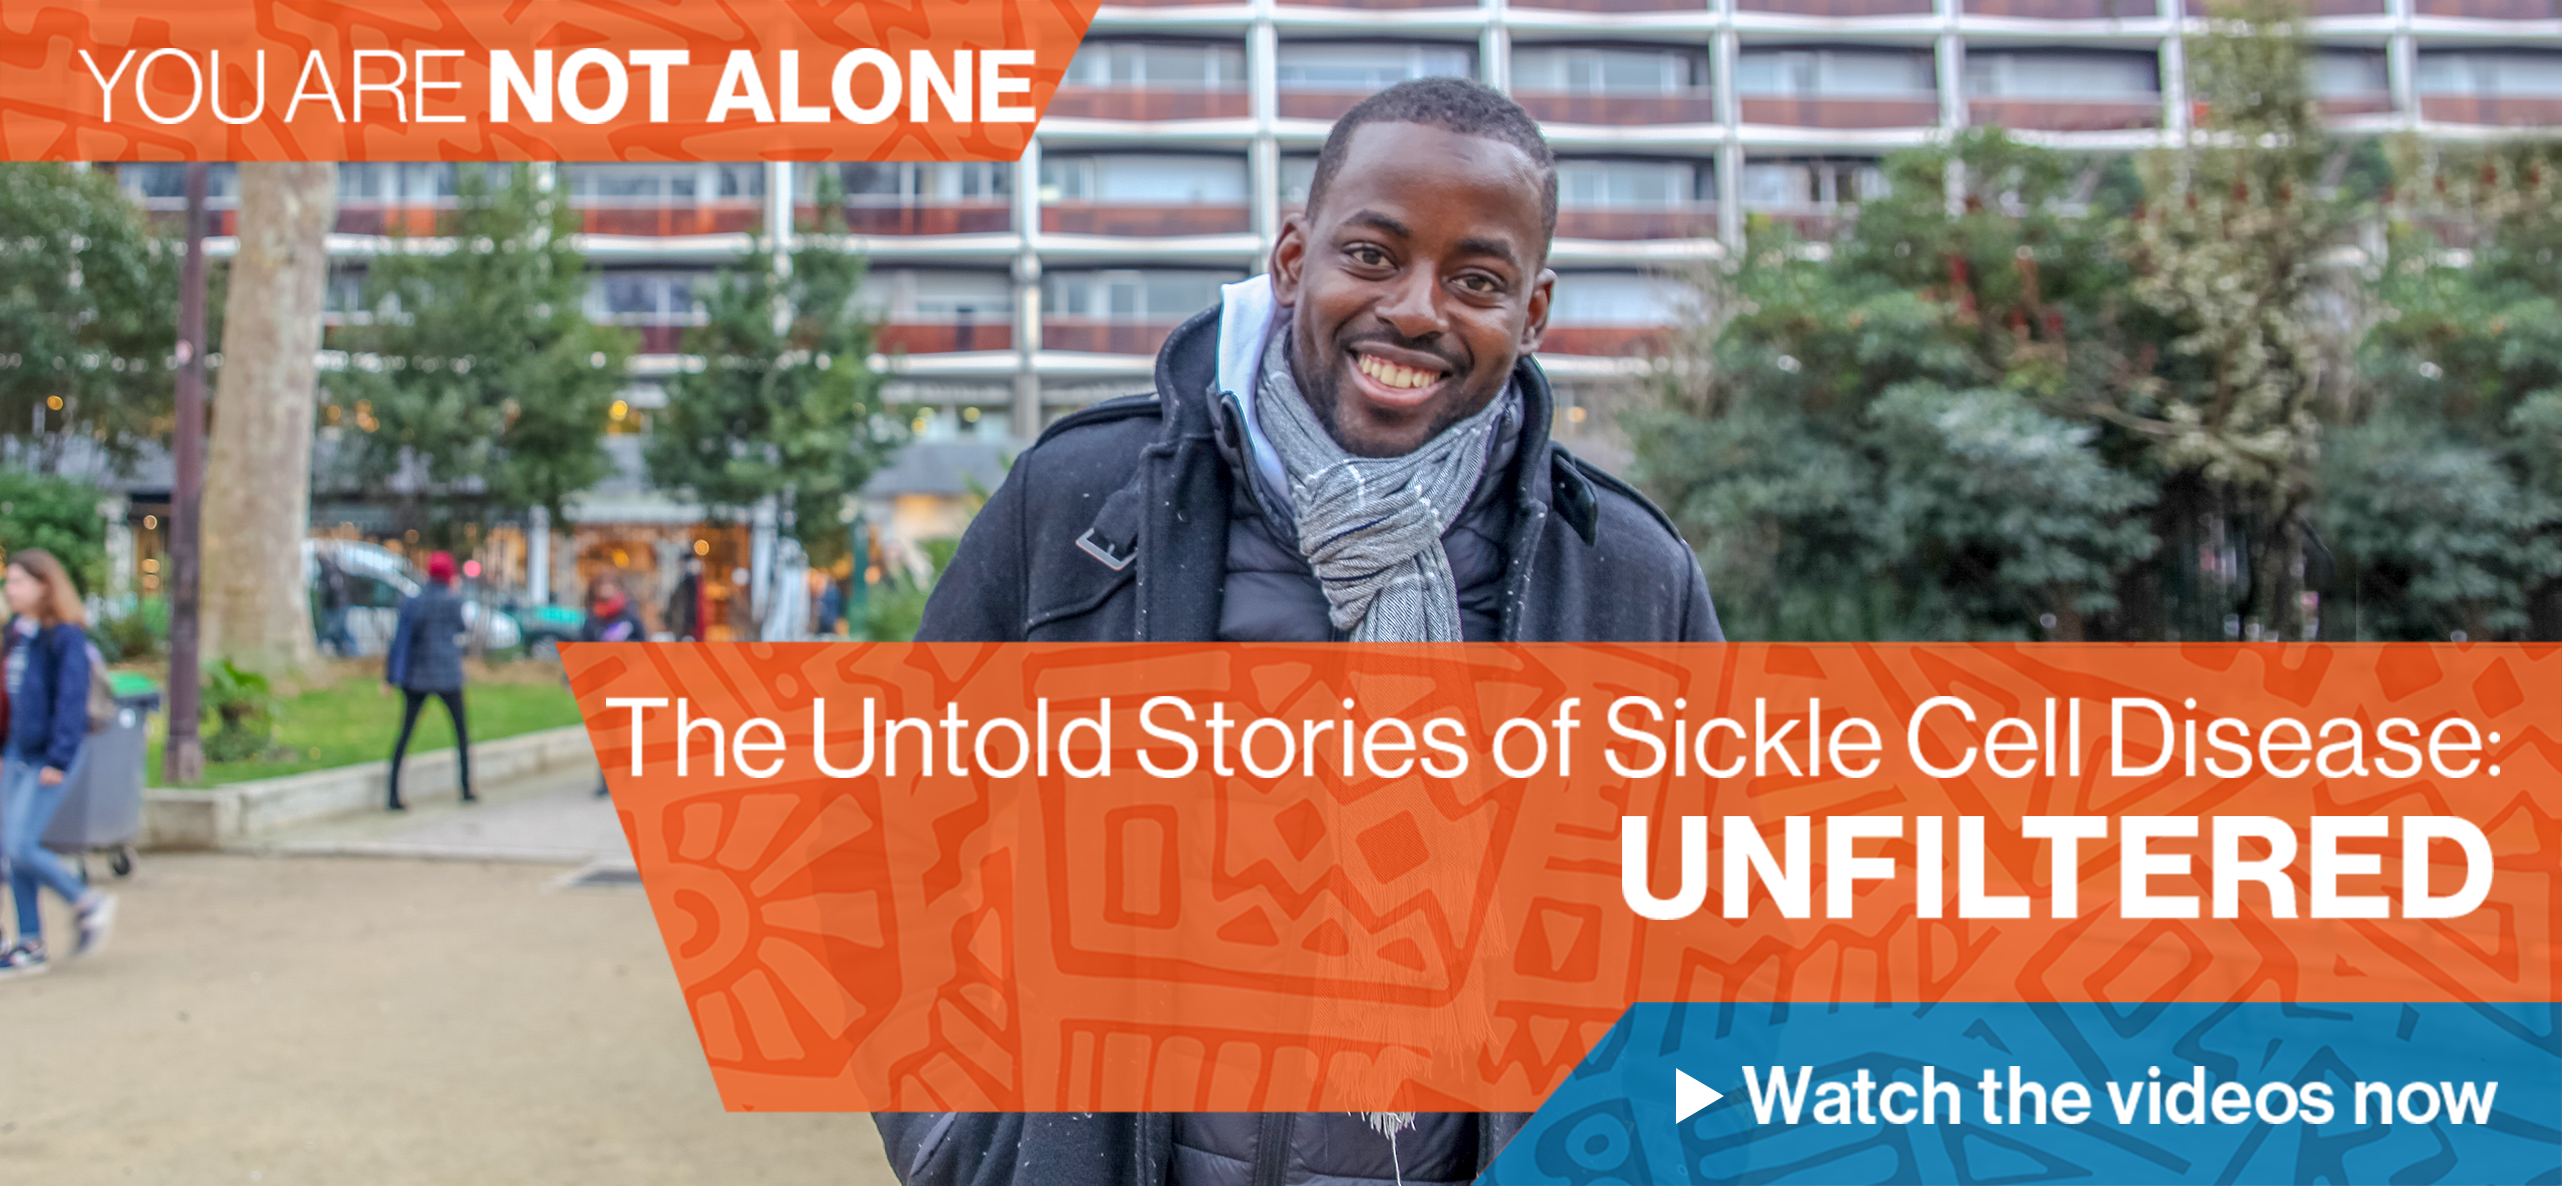 image of person living with sickle cell